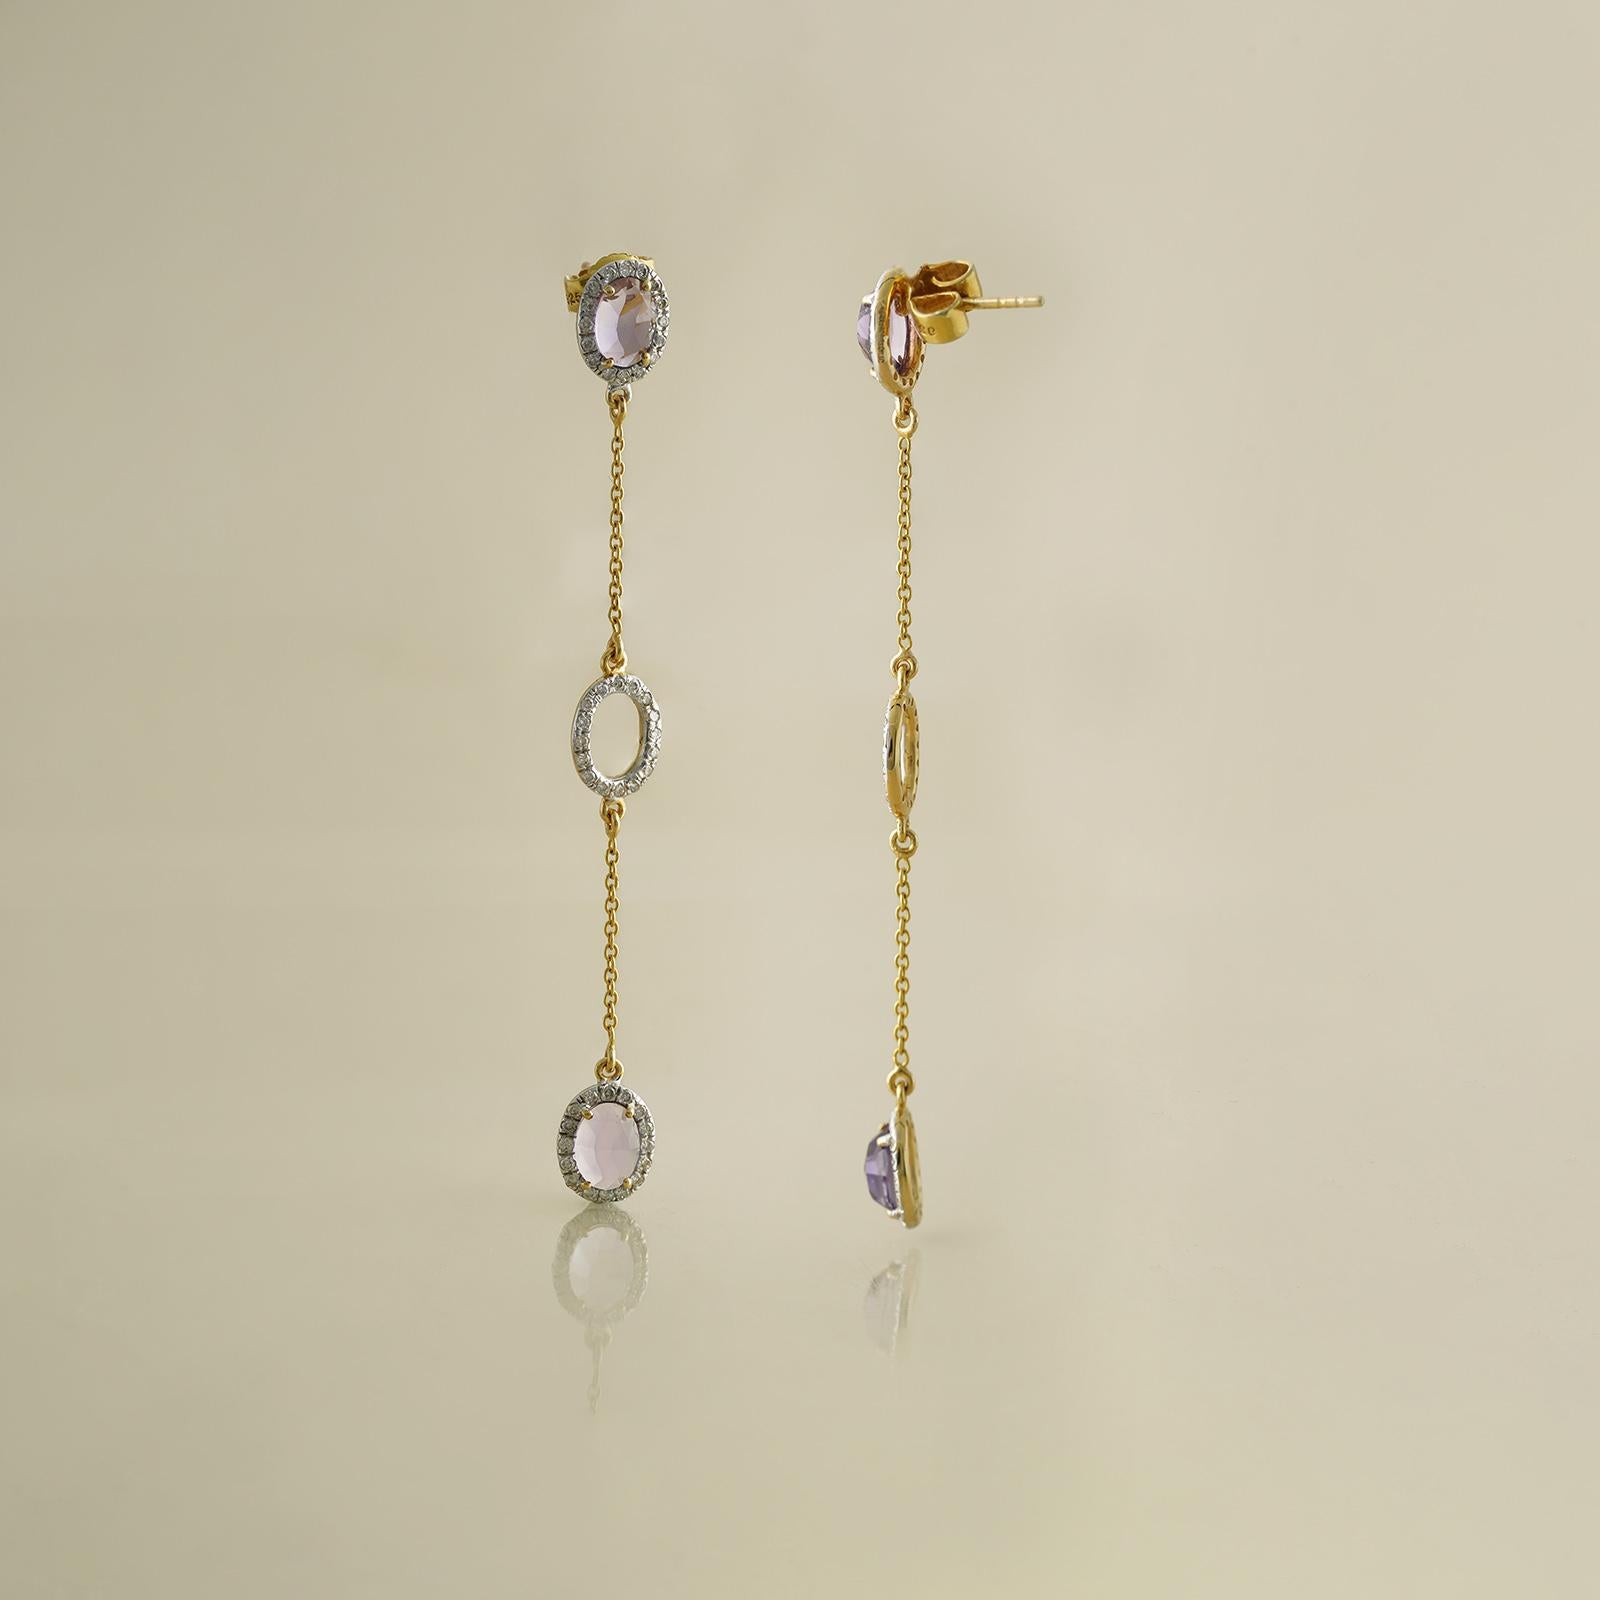 Moi Layla Gold Diamond and Amethyst Earrings In New Condition For Sale In Lawrenceville, GA